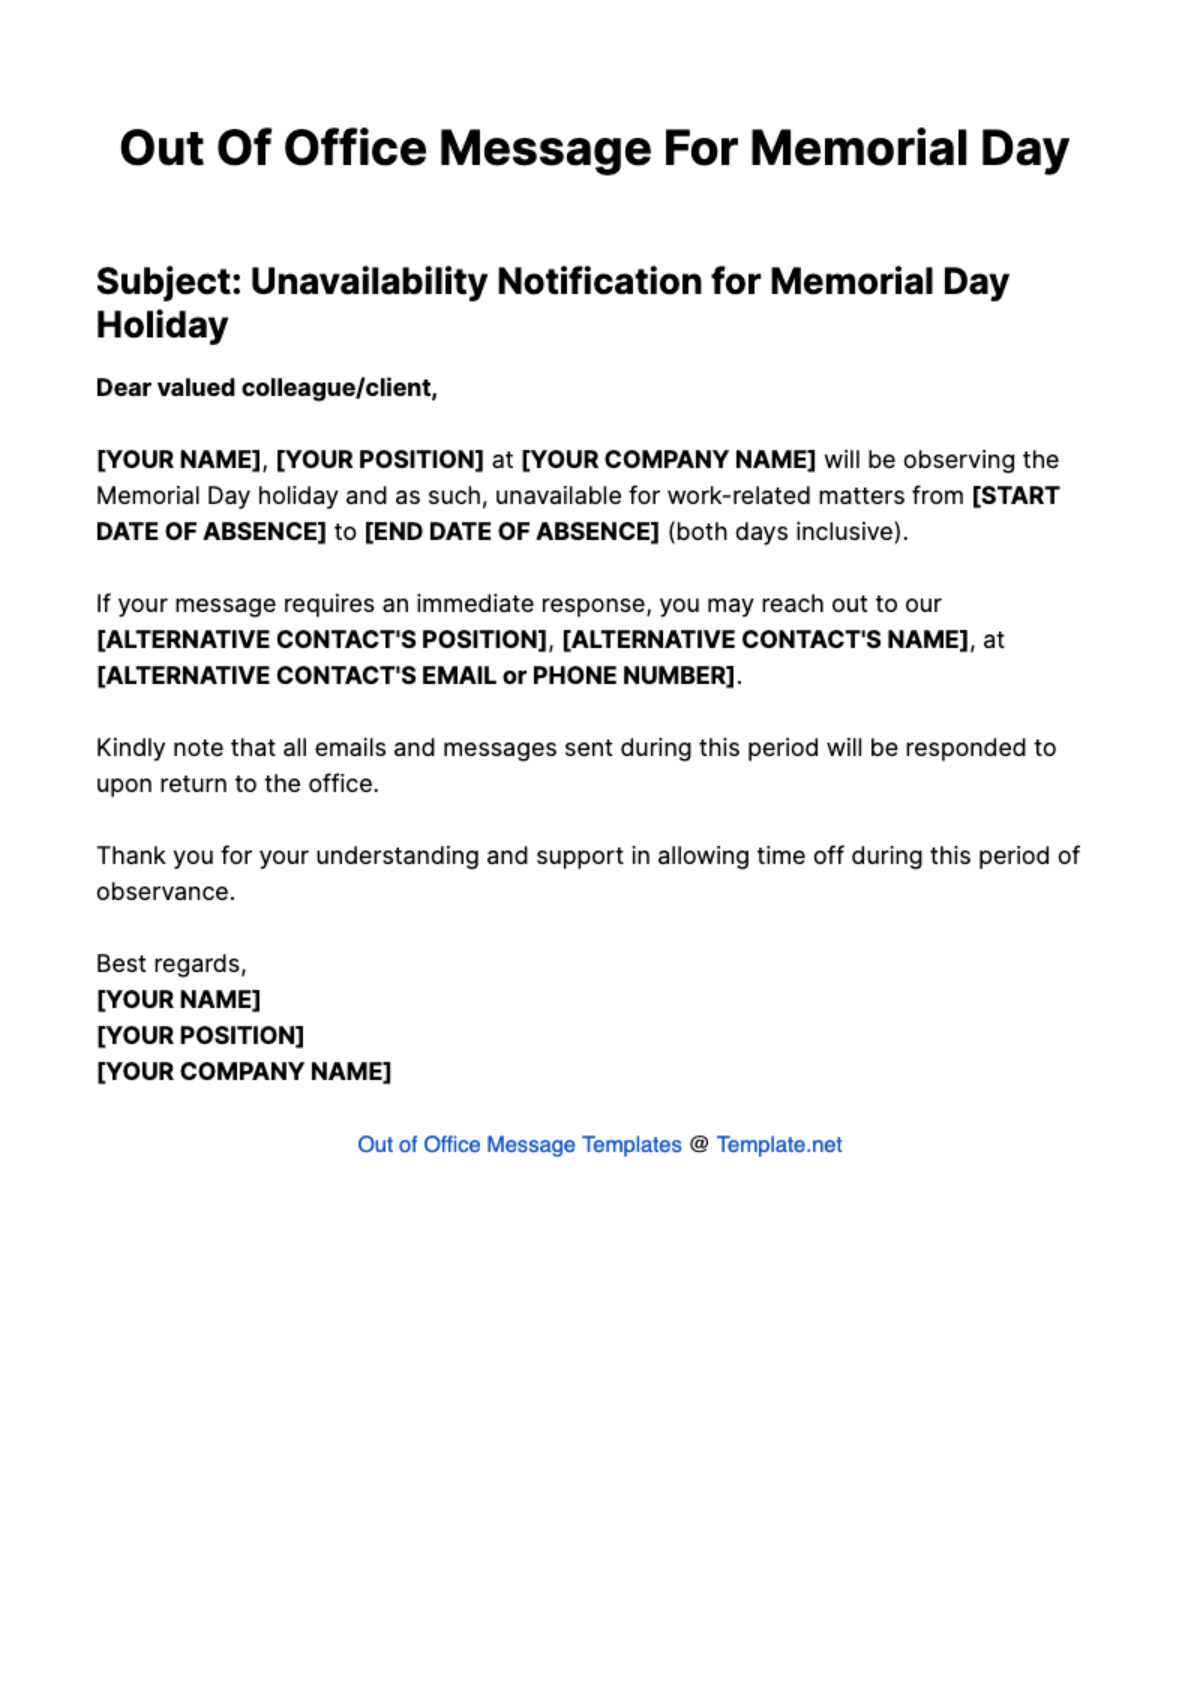 Free Out Of Office Message For Memorial Day Template